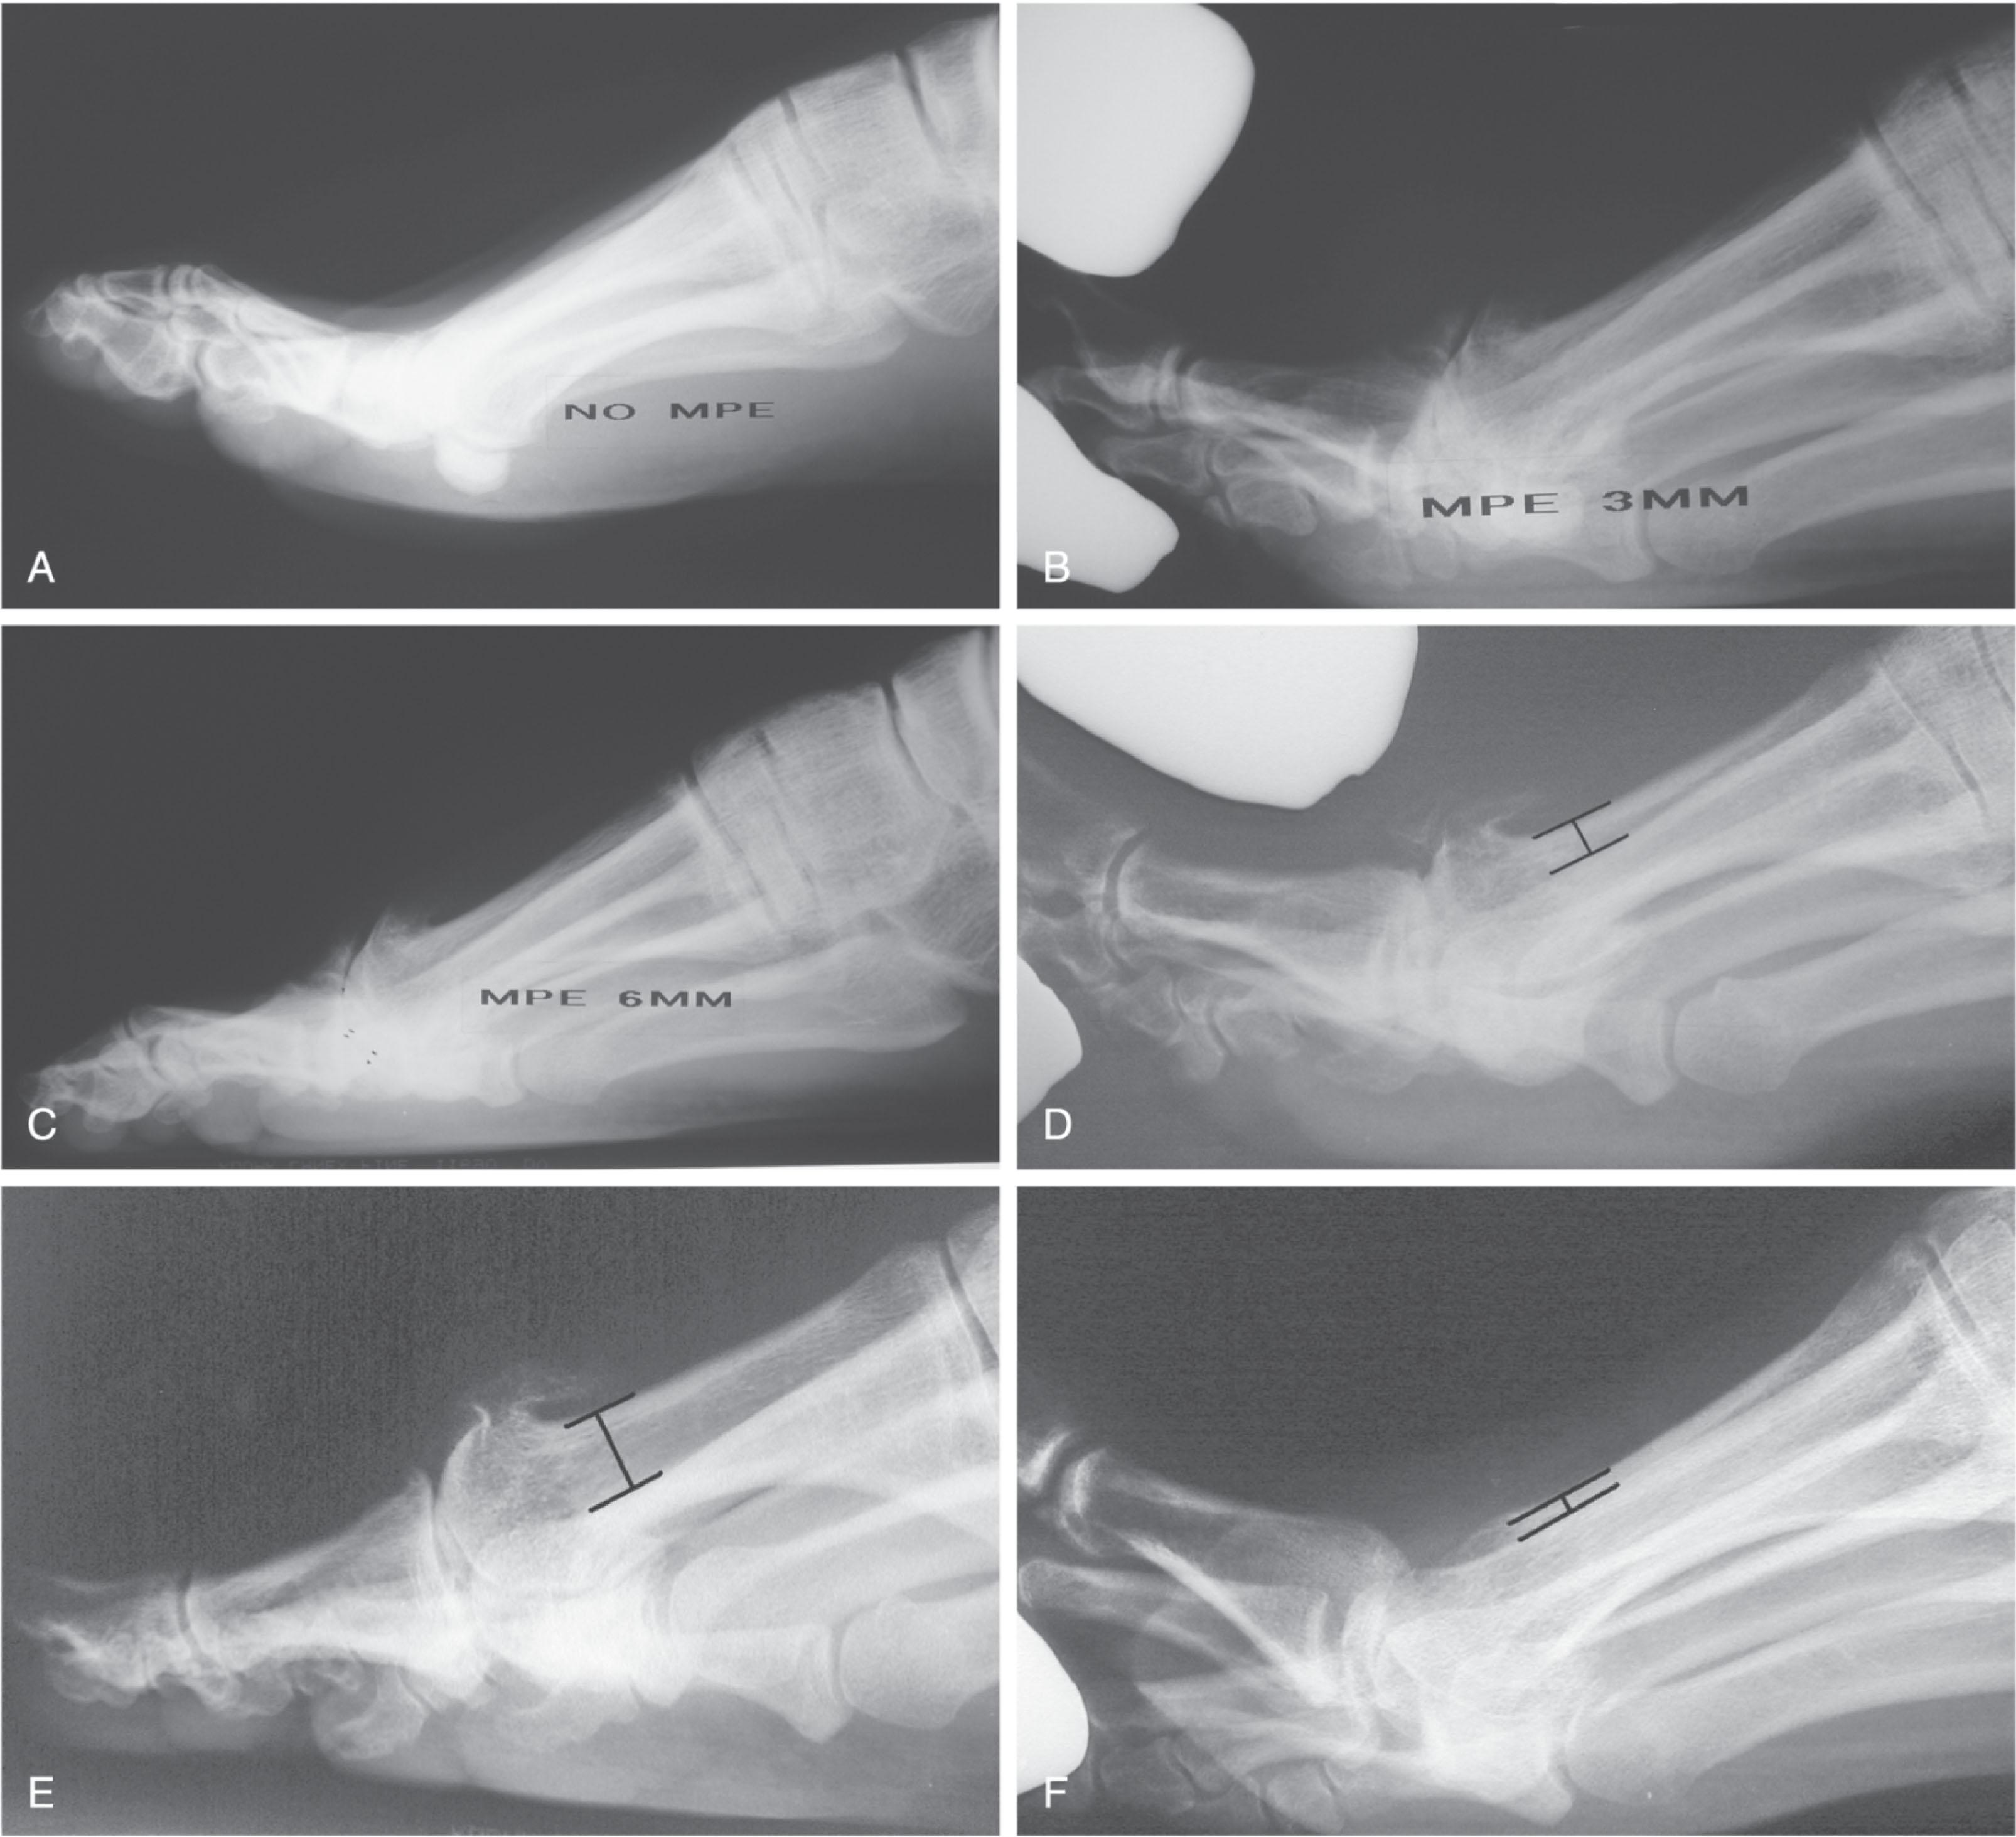 Fig. 27-9, The effect of dorsiflexion stress on the first metatarsophalangeal (MTP) joint with hallux rigidus. Metatarsus primus elevatus correlates with MTP joint arthrosis noted in sequential radiographs taken over an 11-year period. A , Early grade 1 hallux rigidus with no metatarsus elevatus. B , Six years later, elevatus is 3 mm with or without stress test. C , Eleven years later, elevatus is 6 mm. D , Dorsiflexion stress reduces elevatus to 3 mm. E , Elevatus does increase with increasing grade of hallux rigidus. F , Elevatus is often reduced after either a cheilectomy or MTP arthrodesis.